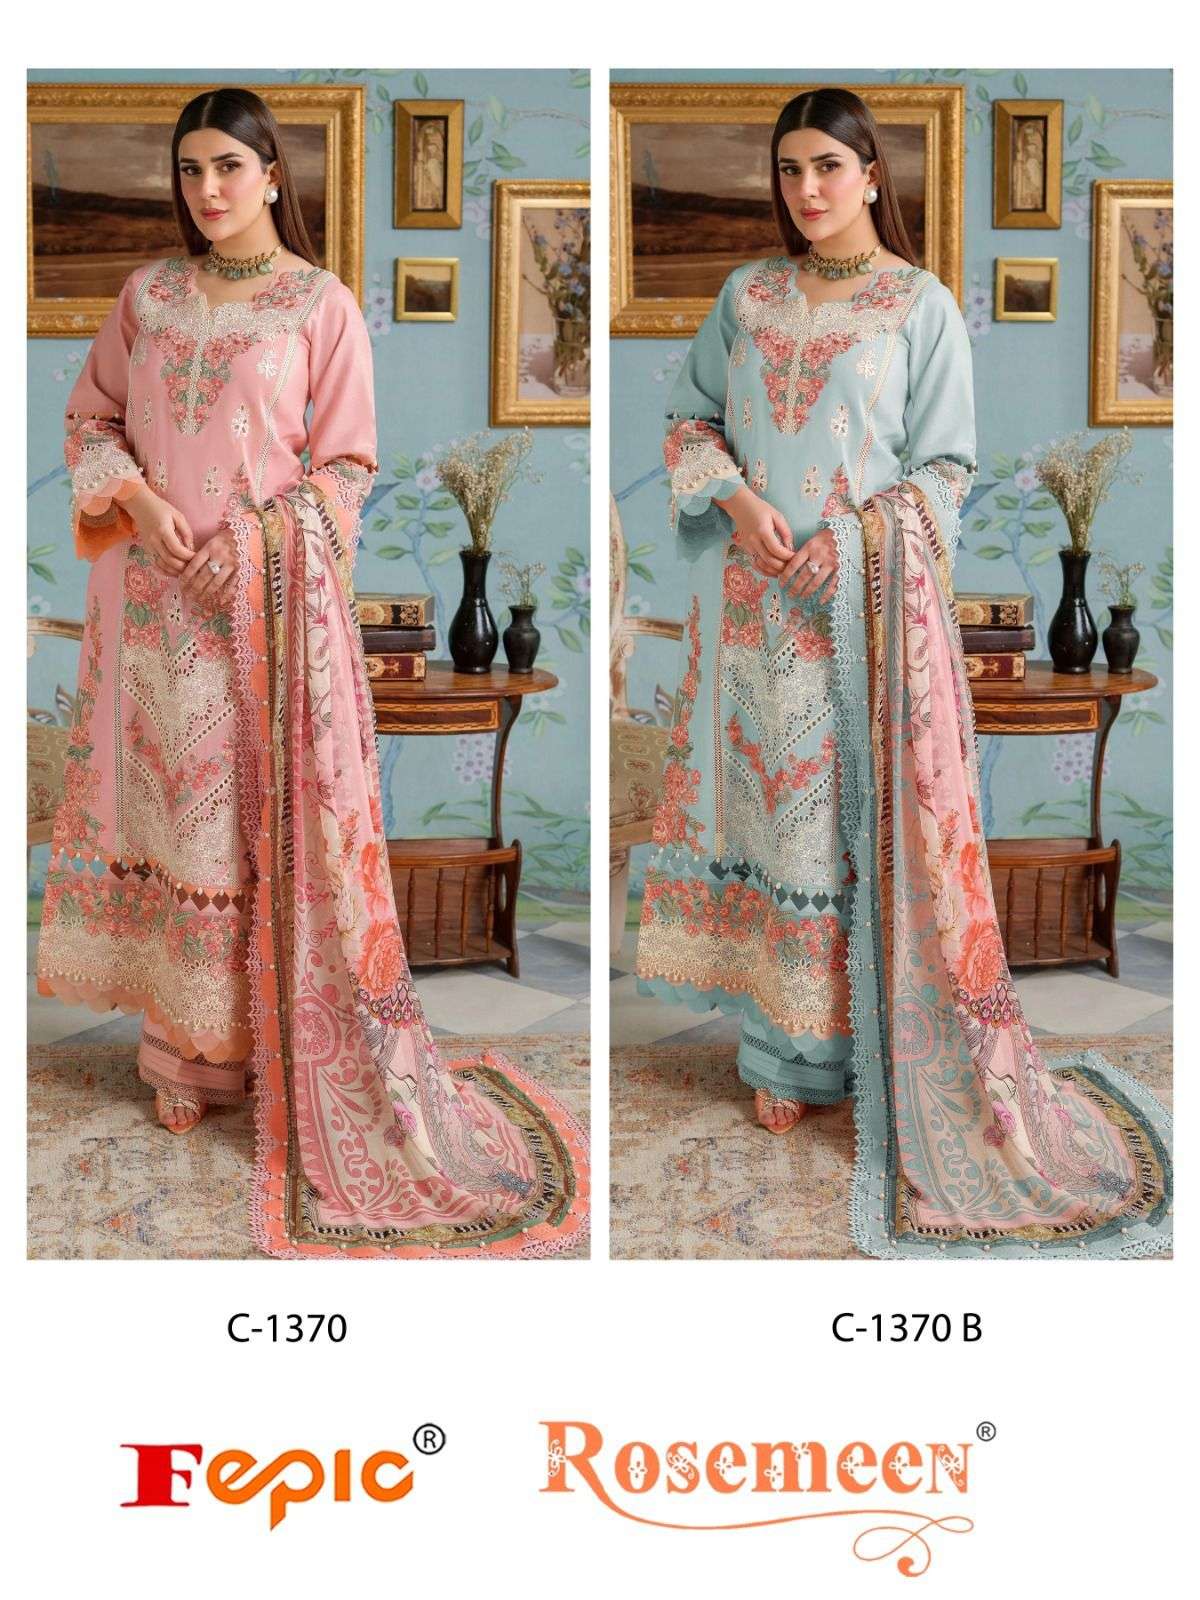 ROSEMEEN 1370 NX BY FEPIC PURE COTTON PRINT EMBROIDERY WORK PAKISTANI DRESSES